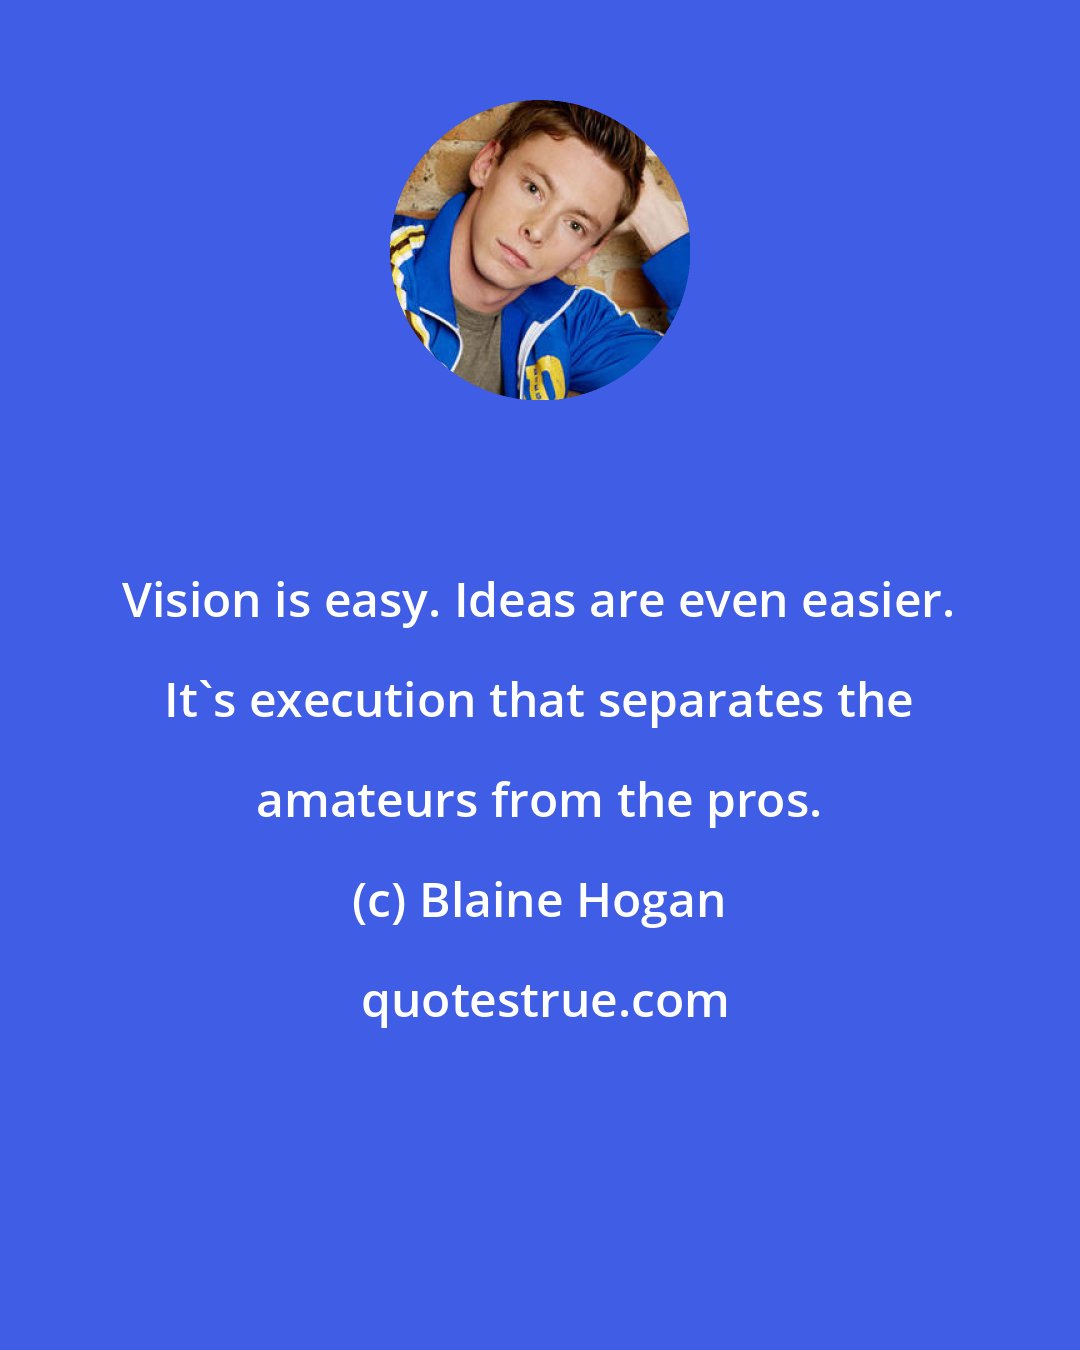 Blaine Hogan: Vision is easy. Ideas are even easier. It's execution that separates the amateurs from the pros.